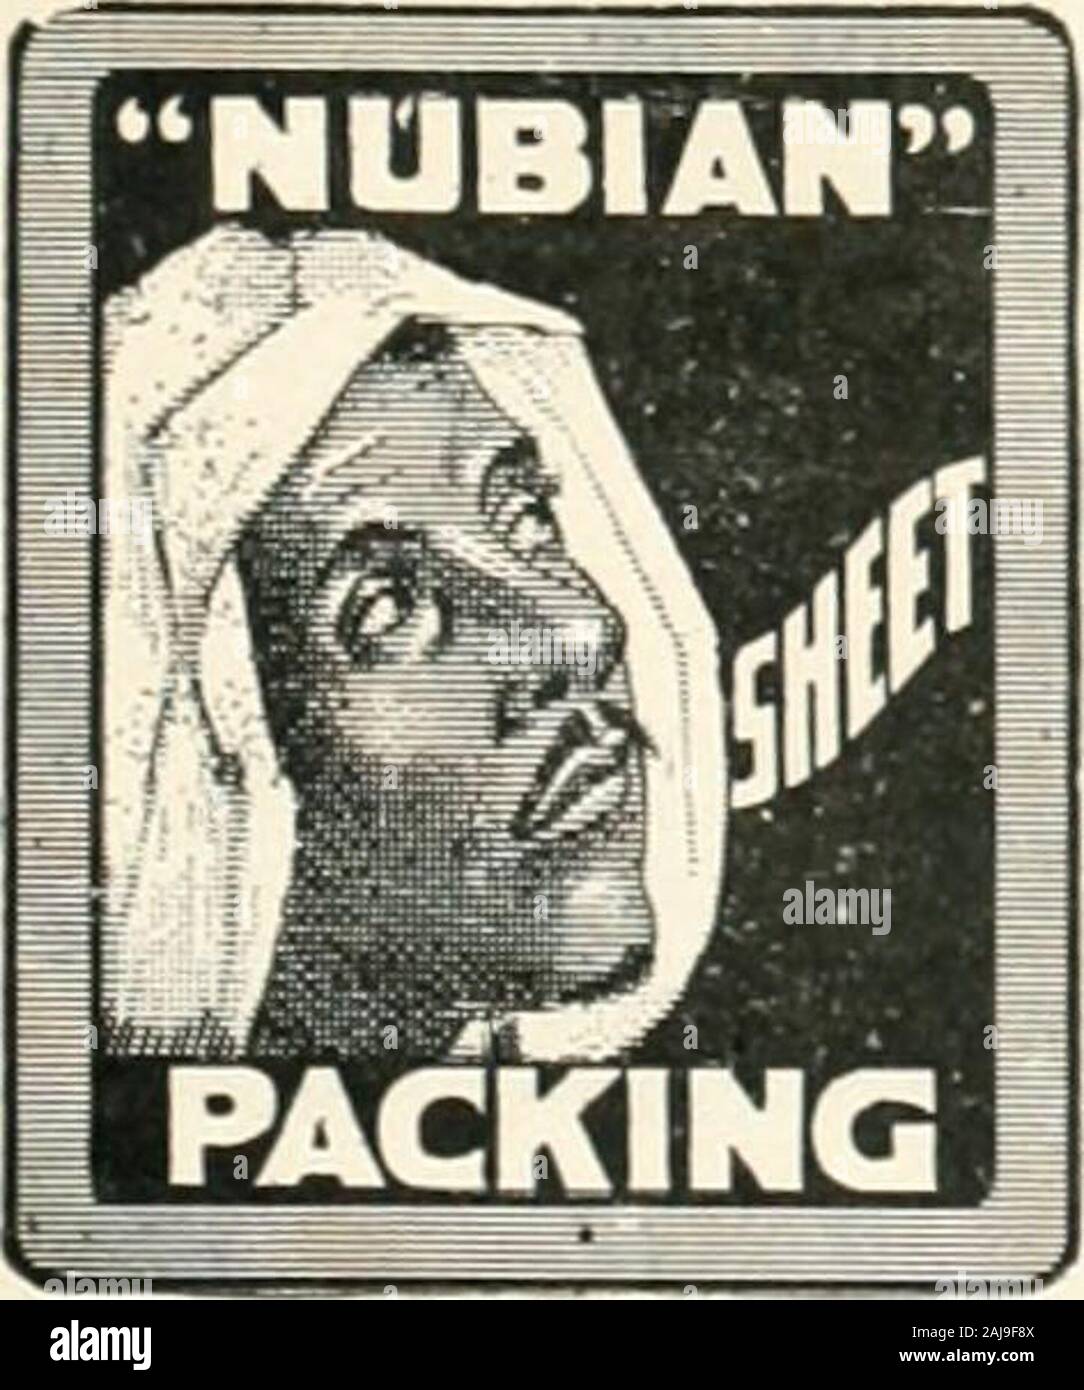 India rubber world . vyui i-^UUId.!! I^C1.V,^IM11^ guaranteed to stand higher temperature than any other packing, and will retain its strength and pliability under conditions that destroy other packings. Flat and Tubular Gaskets made from •Nubian Stock. Voorhees Rubber Manufacturing Co. BRANCH STORE: 75-77 Lake St., Chicago. MeiMon The India Rubtjer World when you write. 18=40 BOSTWICK AVENUE, JERSEY CITY, NEW JERSEY. VI THE INDIA RUBBER ^VORLD LOCTOBER I, 1904. HODGMANS Mackintoshes, Alexombric Rmh Coatsand Rubber Surface Clothing give Sivtisfaction to the dealer and the wearer A large assort Stock Photo